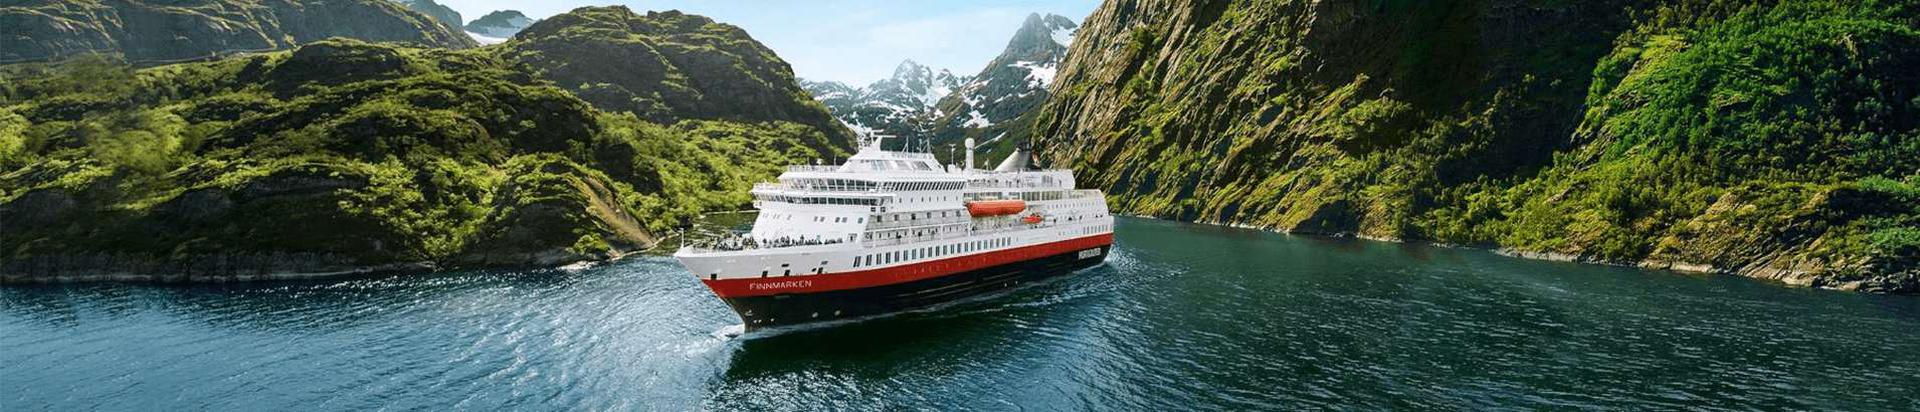 No tax arrears, court decisions missing, court hearings missing, fiscal year reports submitted. Main responsible spokesperson, us.expeditions@hurtigruten.com, +372 54005331